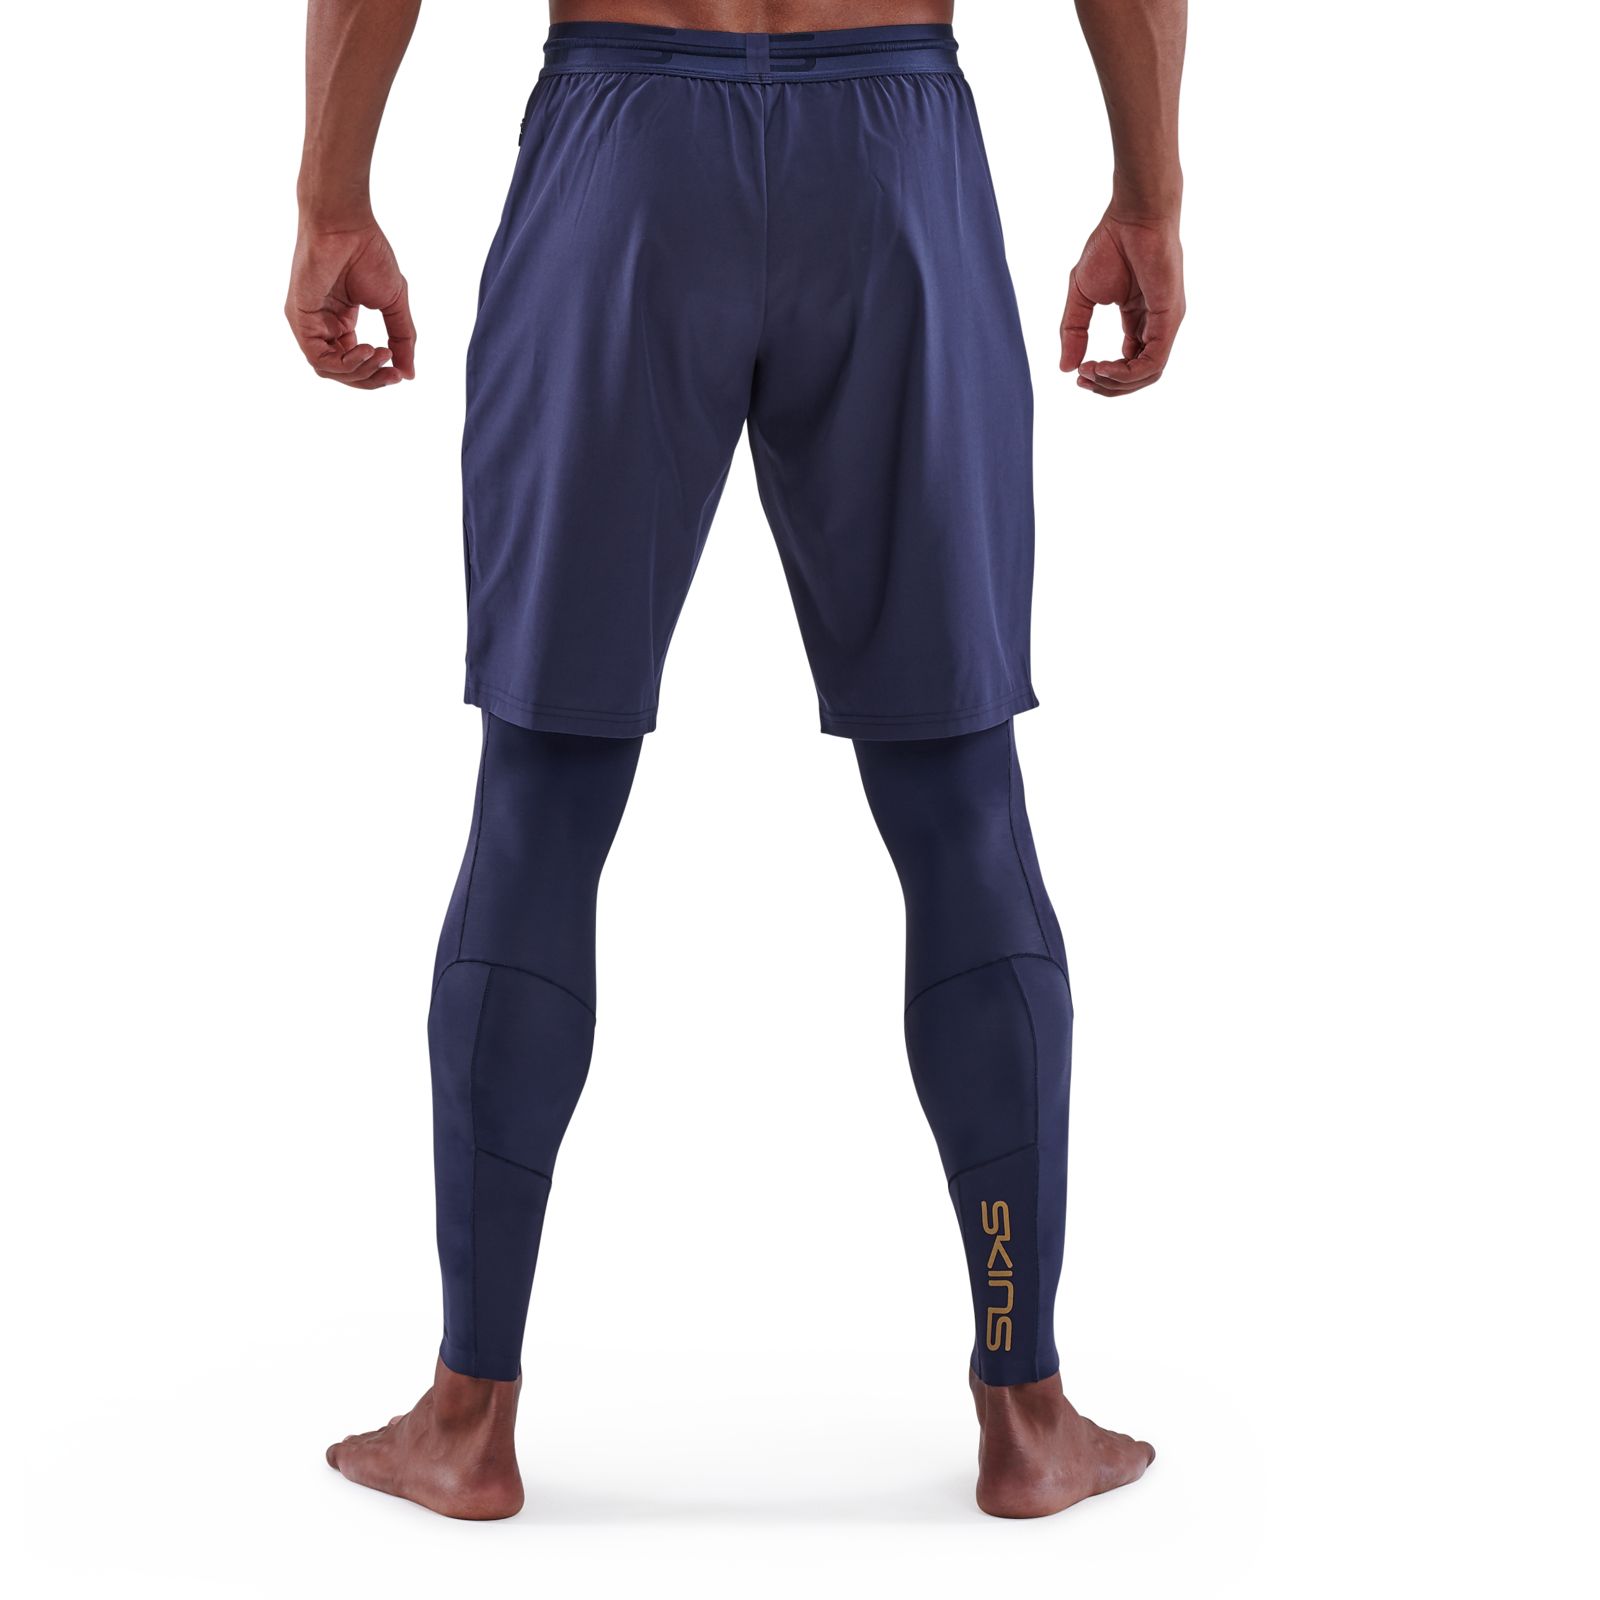 SKINS SERIES-5 MEN'S TRAVEL AND RECOVERY LONG TIGHTS NAVY BLUE - SKINS  Compression USA